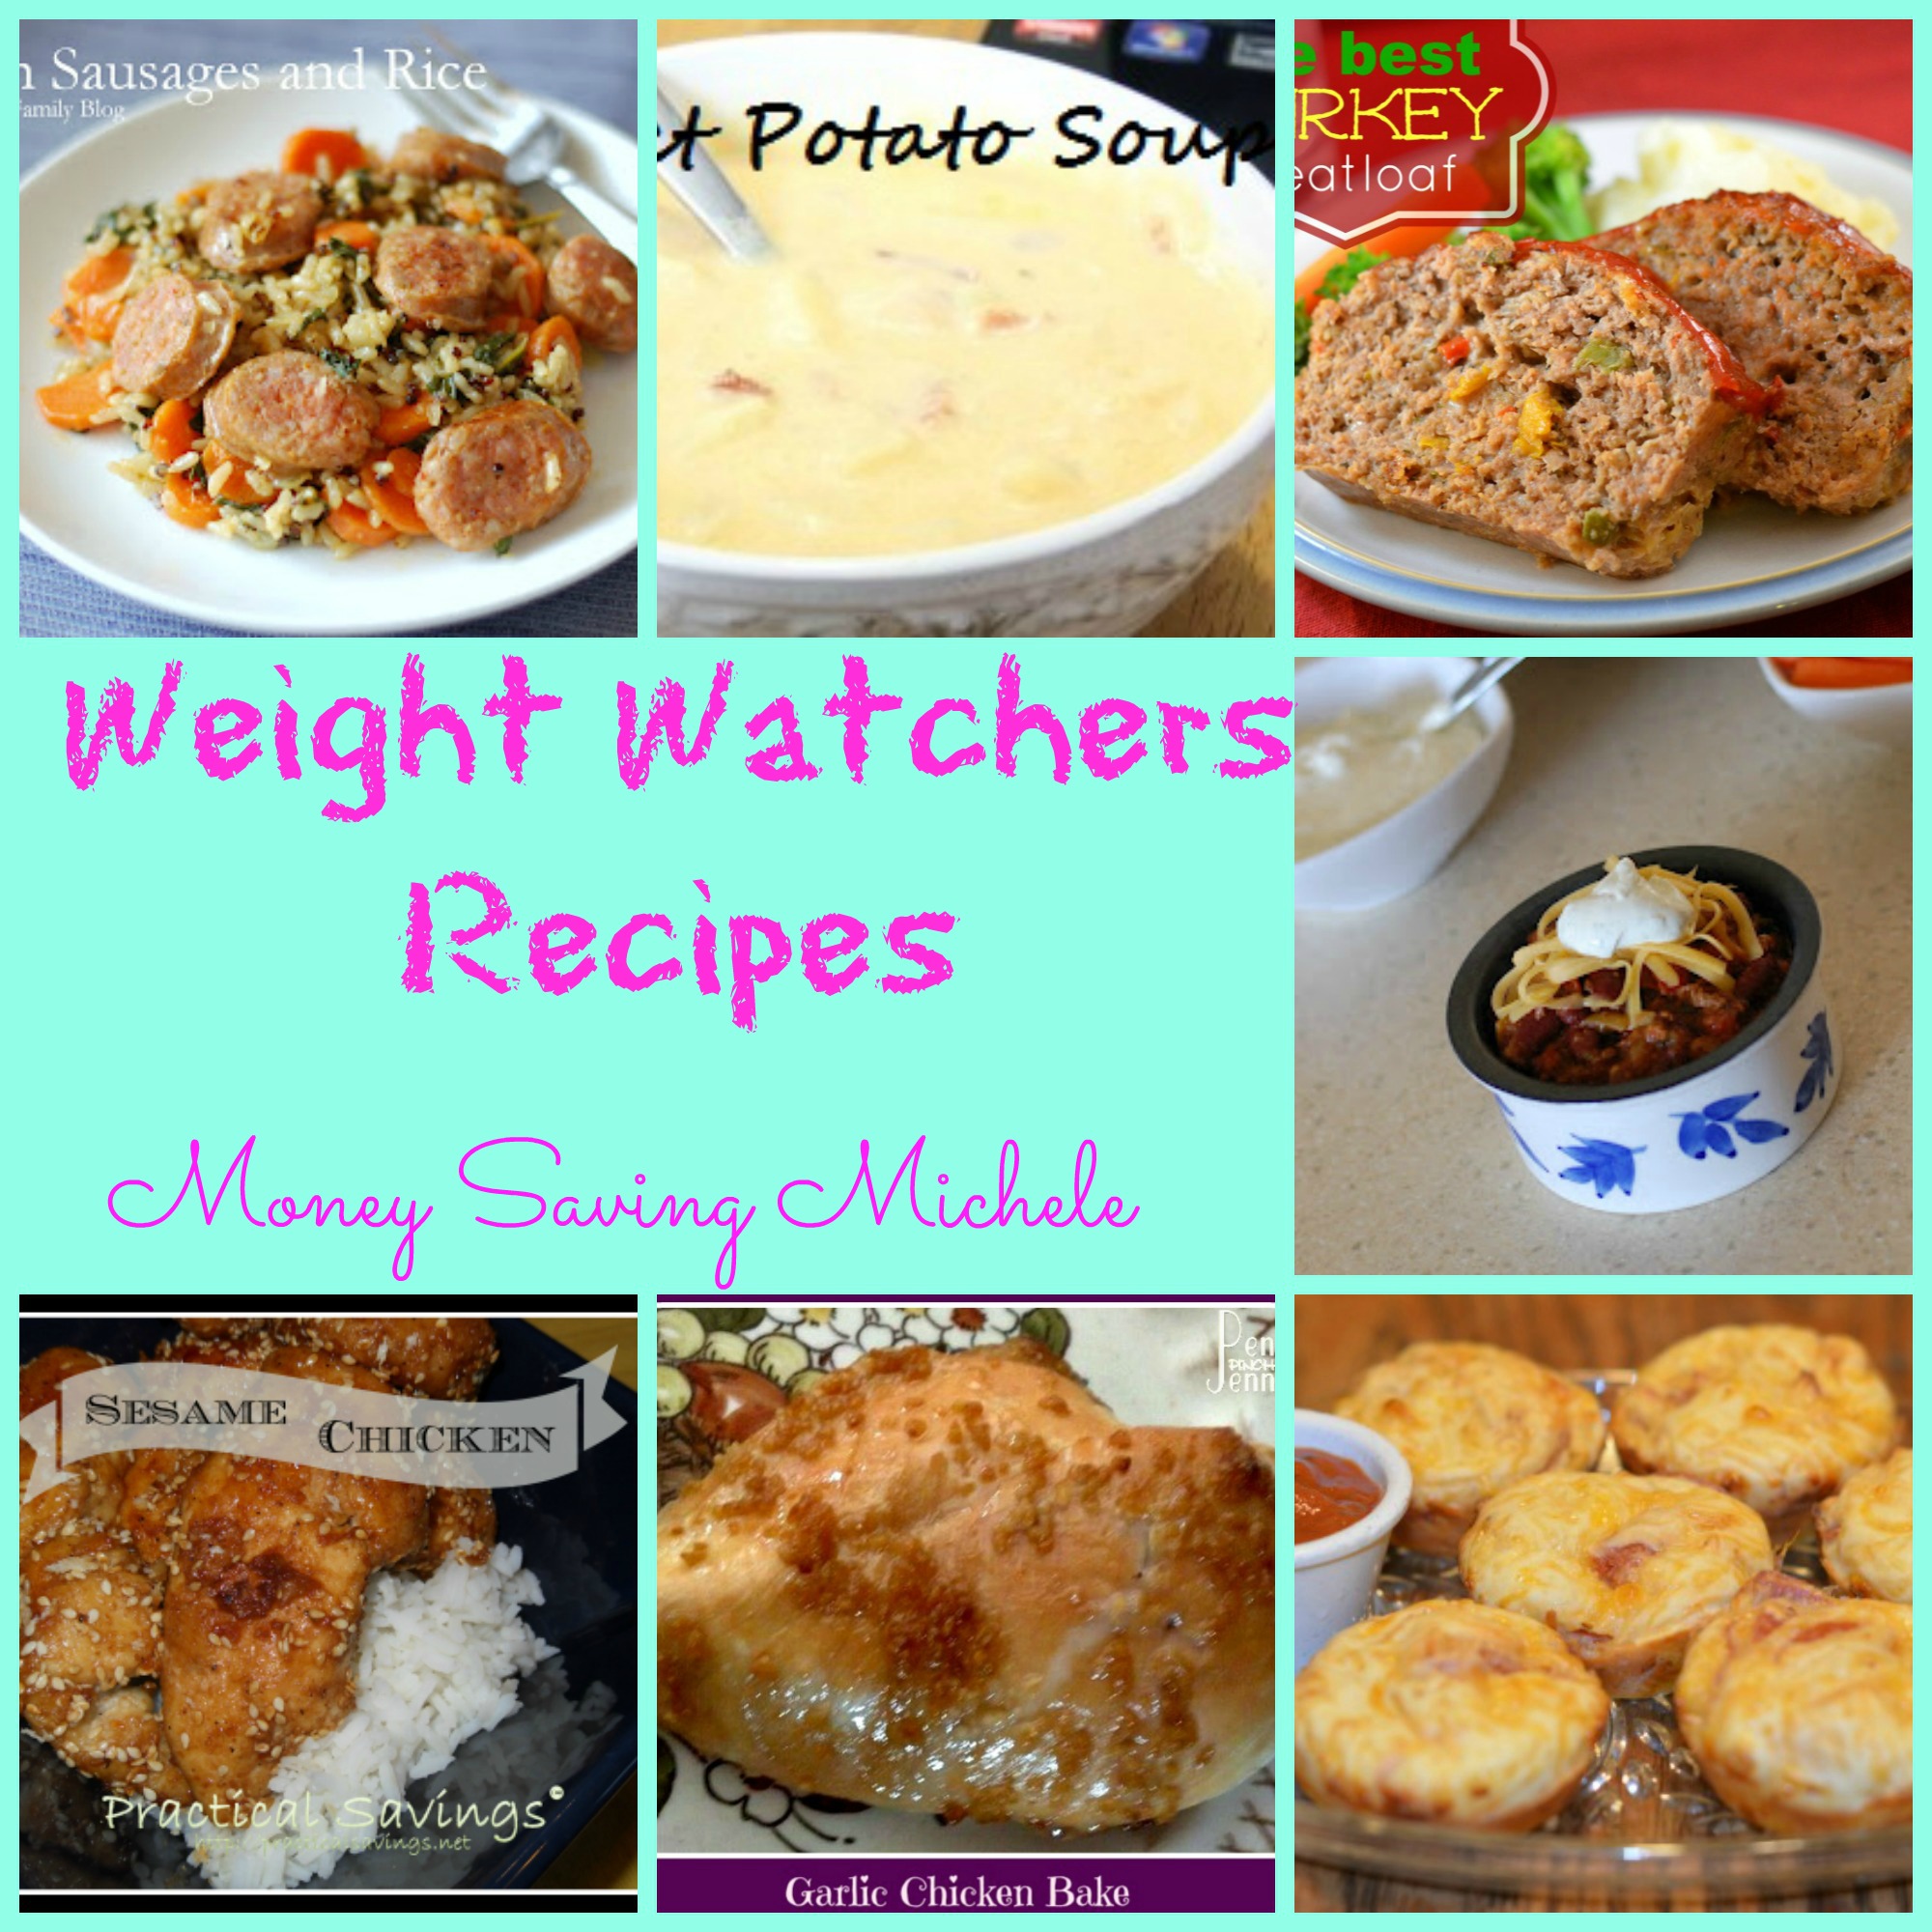 Weight Watchers Recipes Collection Money aving Michele